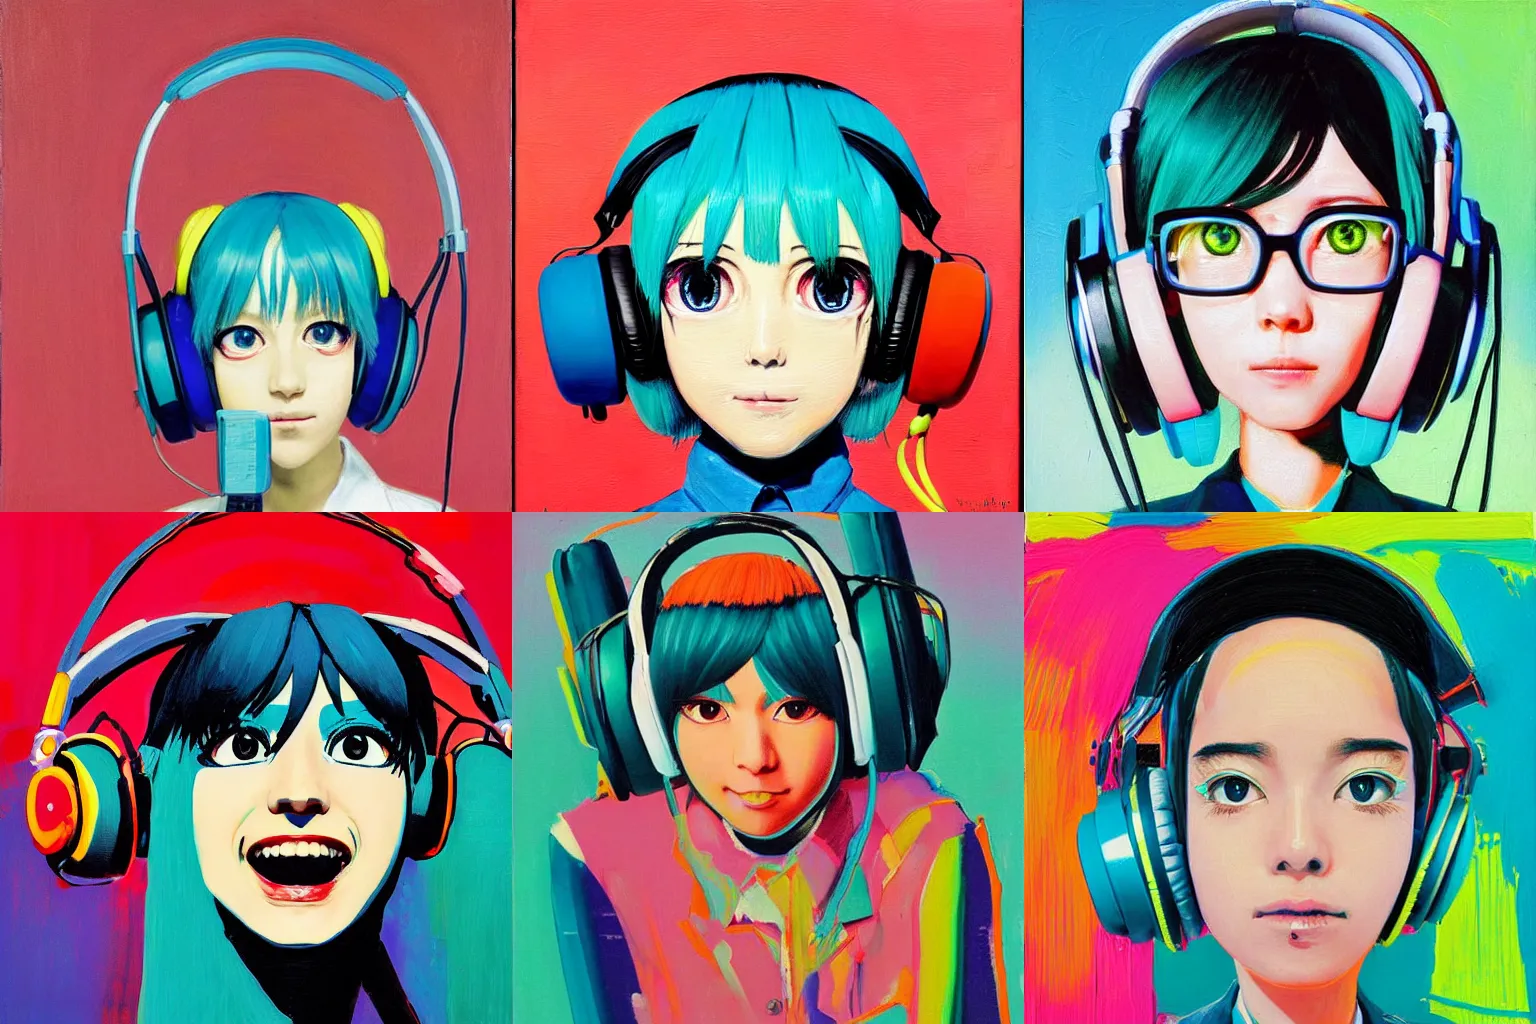 Prompt: a portrait of a serious Hatsune miku with Operator Headphones by Wayne Thiebaud, painting by Wayne Thiebaud, heavy pigment, colourful, heavy impasto technique, anime style, big eyes, space age pop